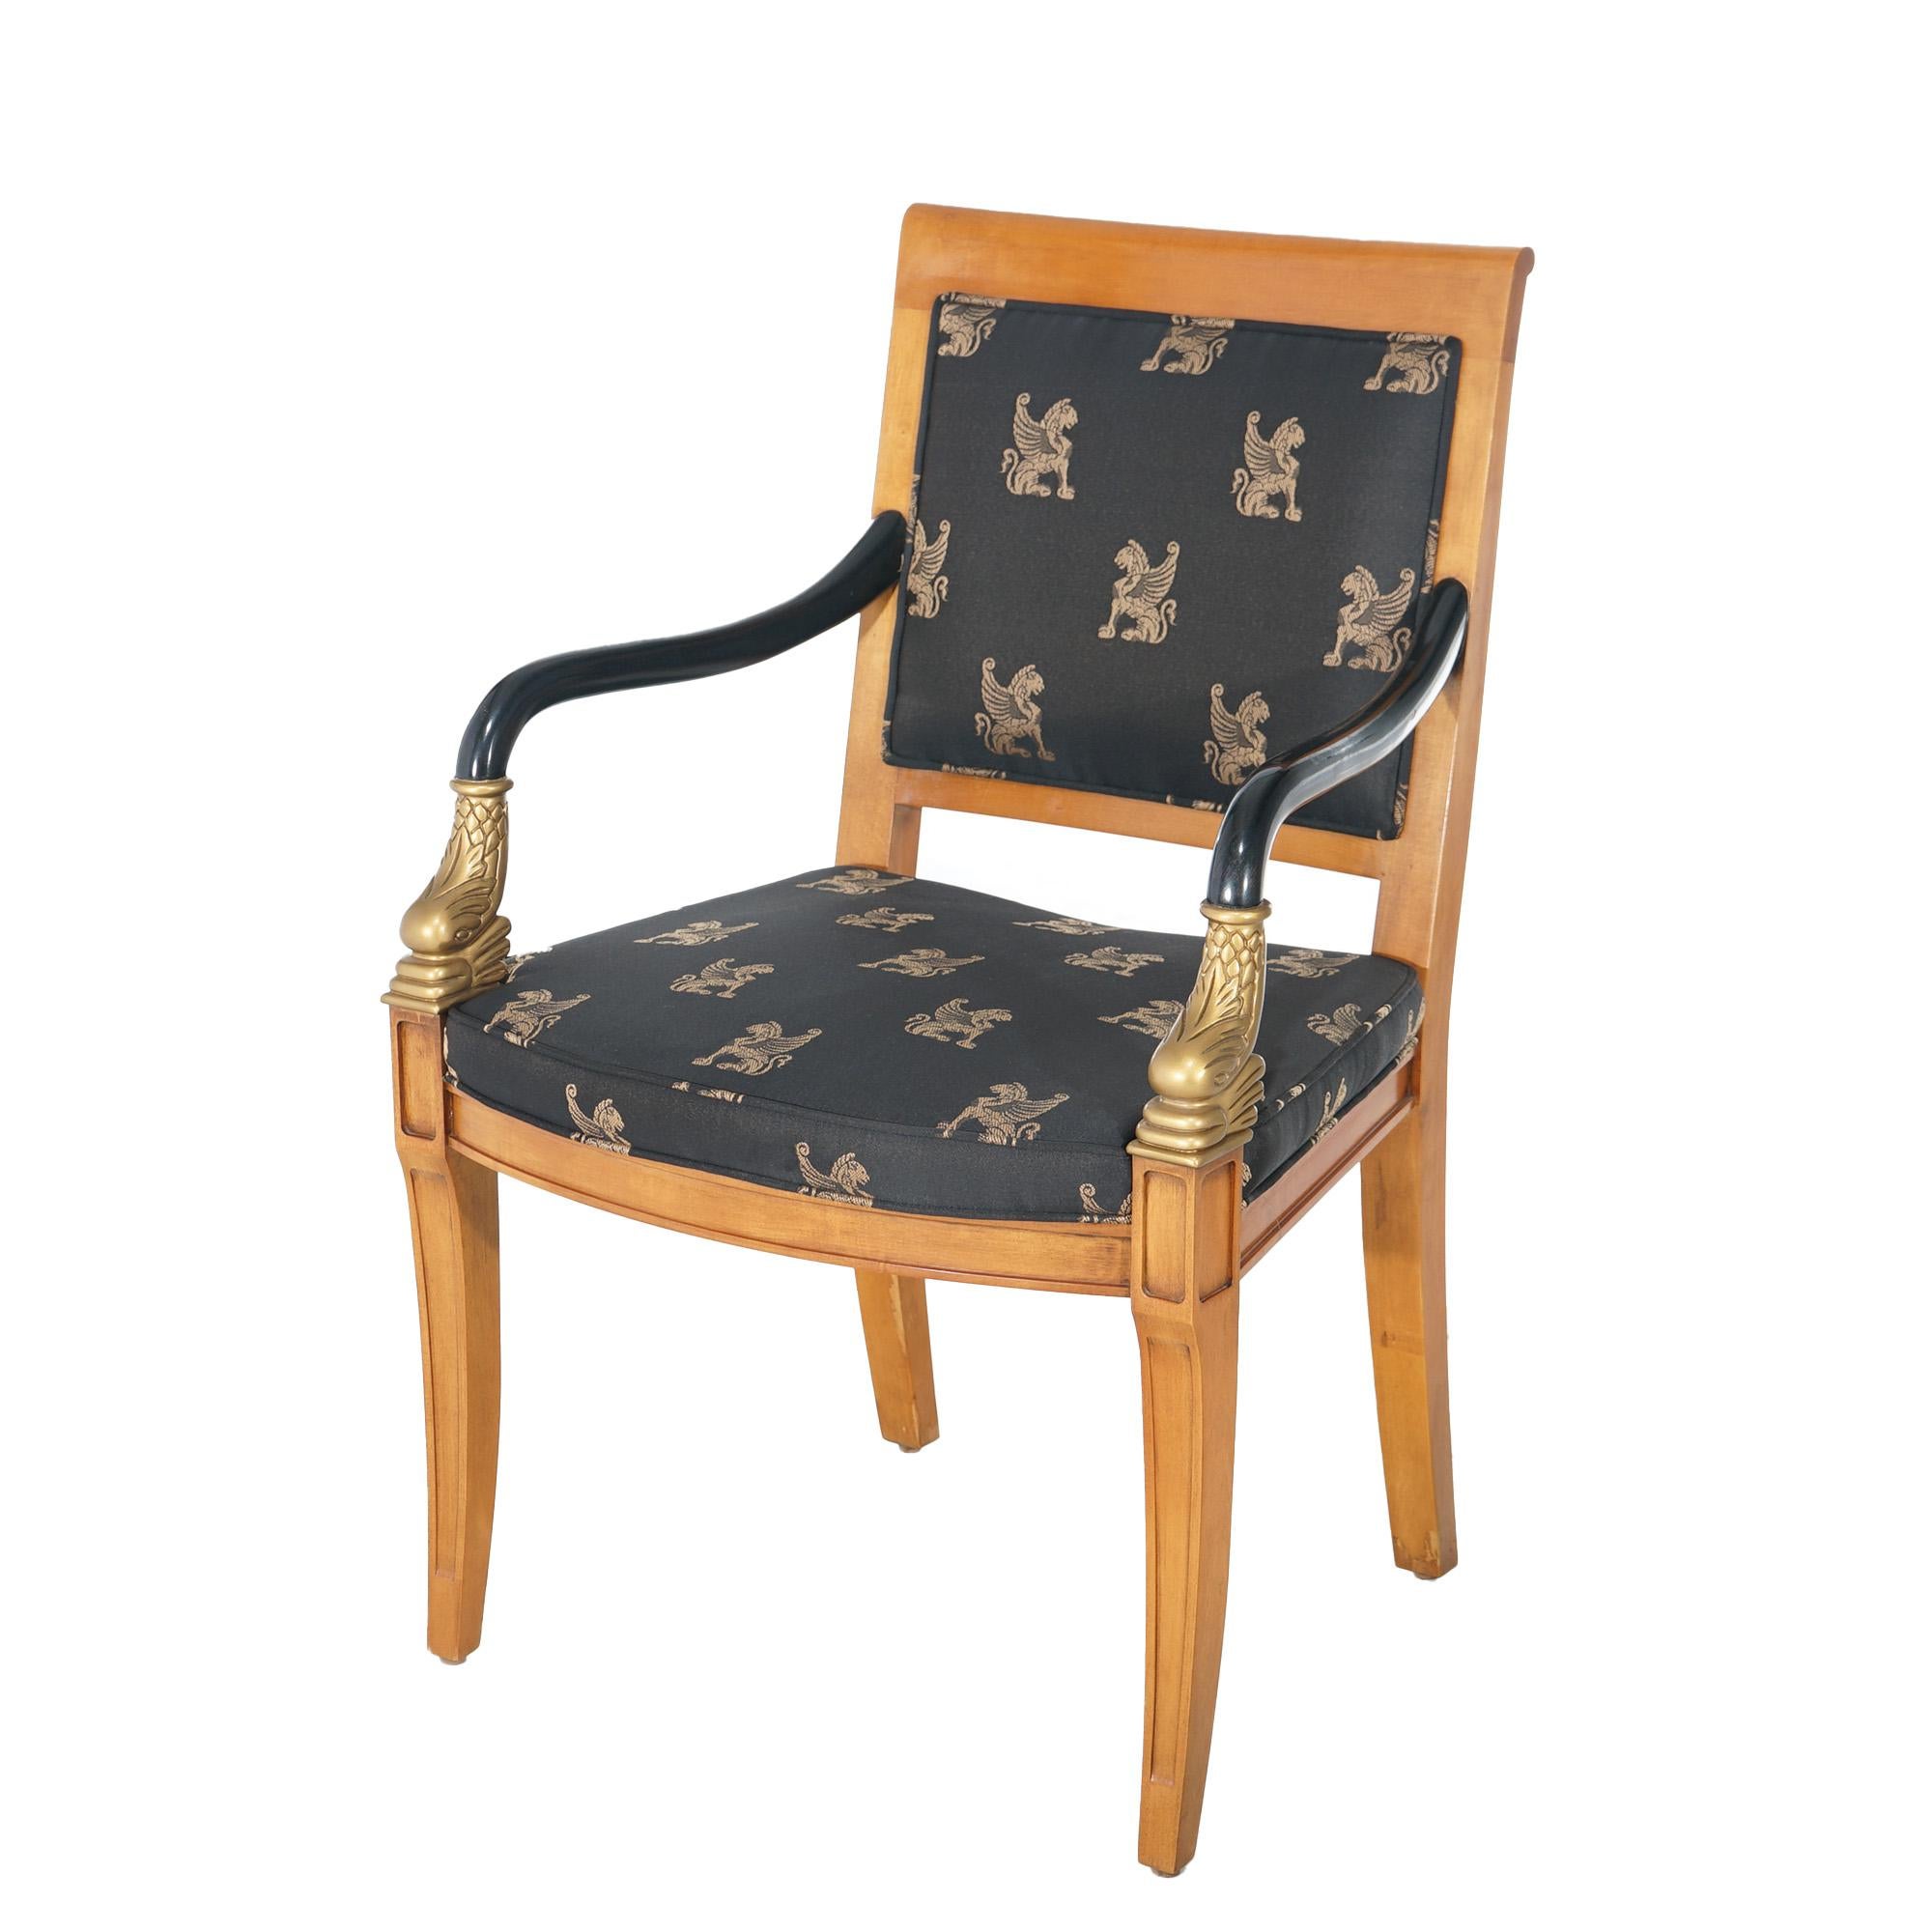 French Empire Figural Ebonized Giltwood Armchair with Dolphins by Century 20thC For Sale